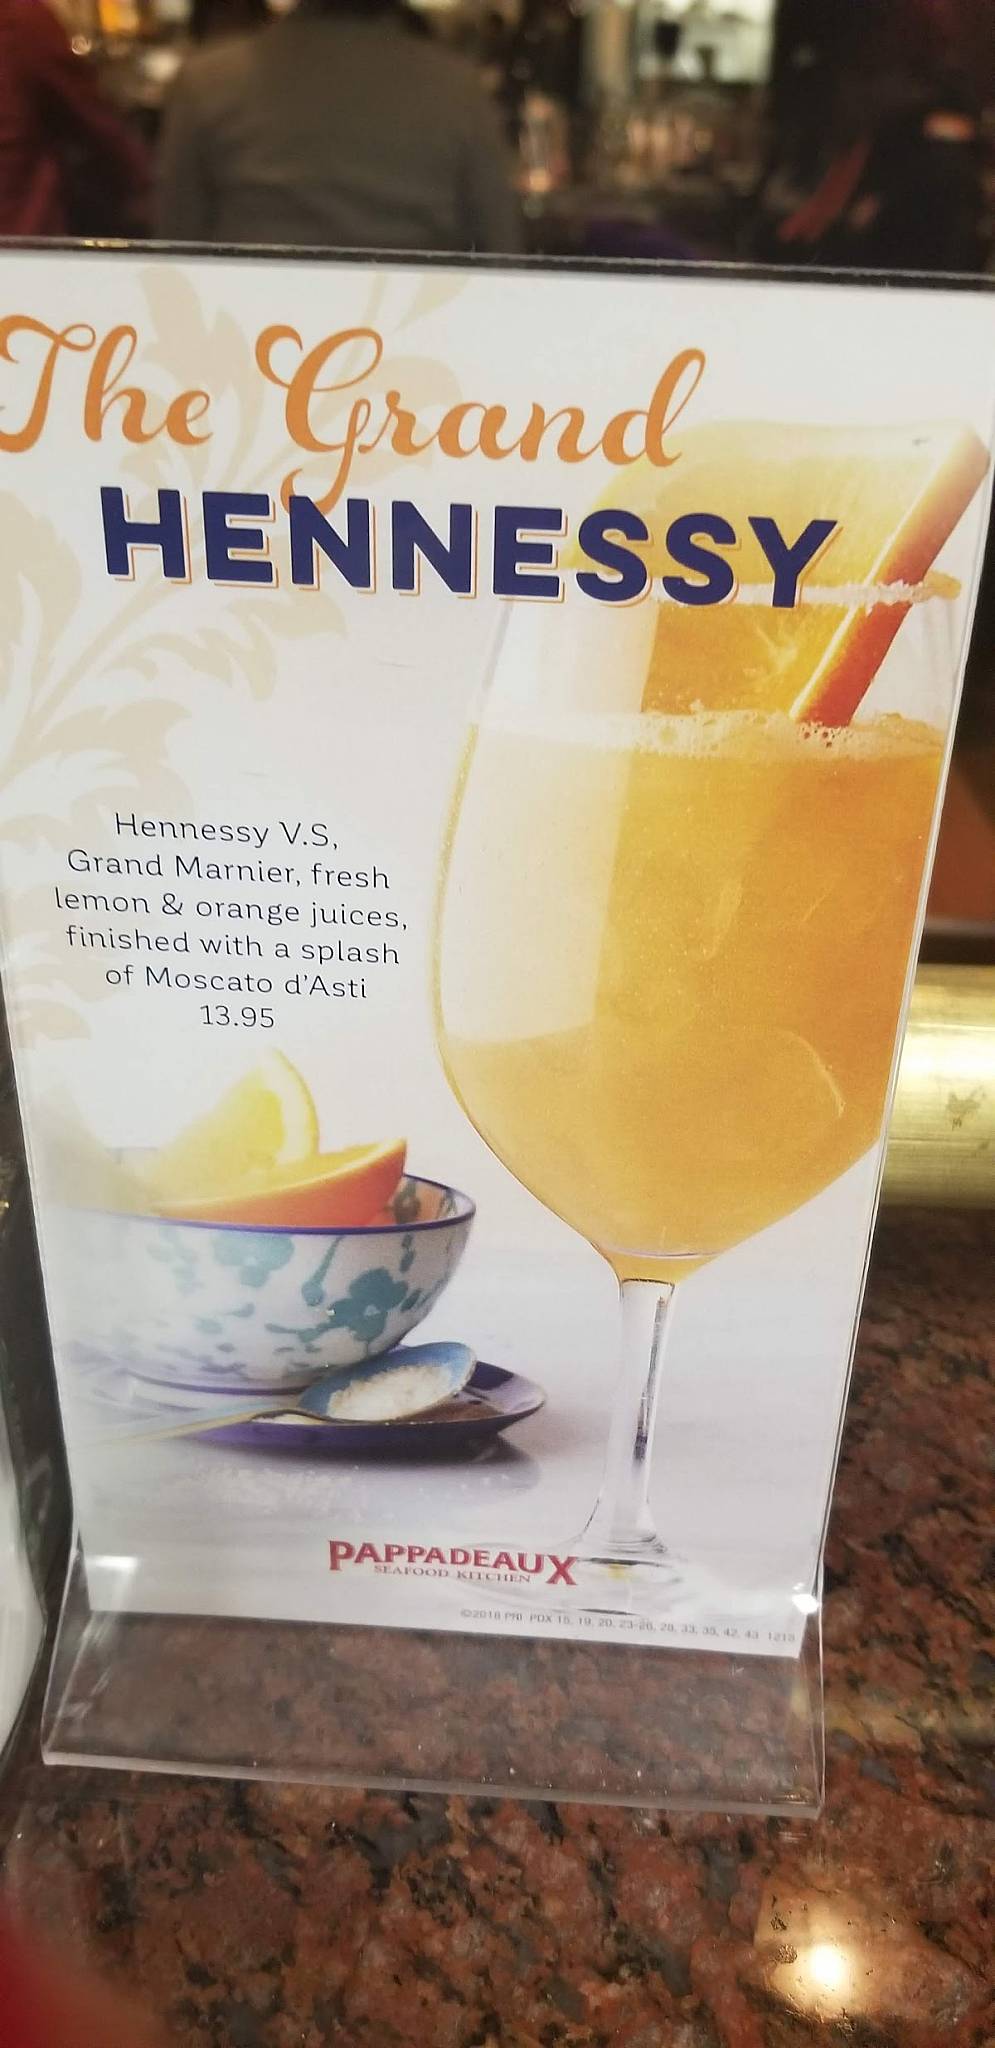 22+ Pappadeaux Grand Hennessy Recipe